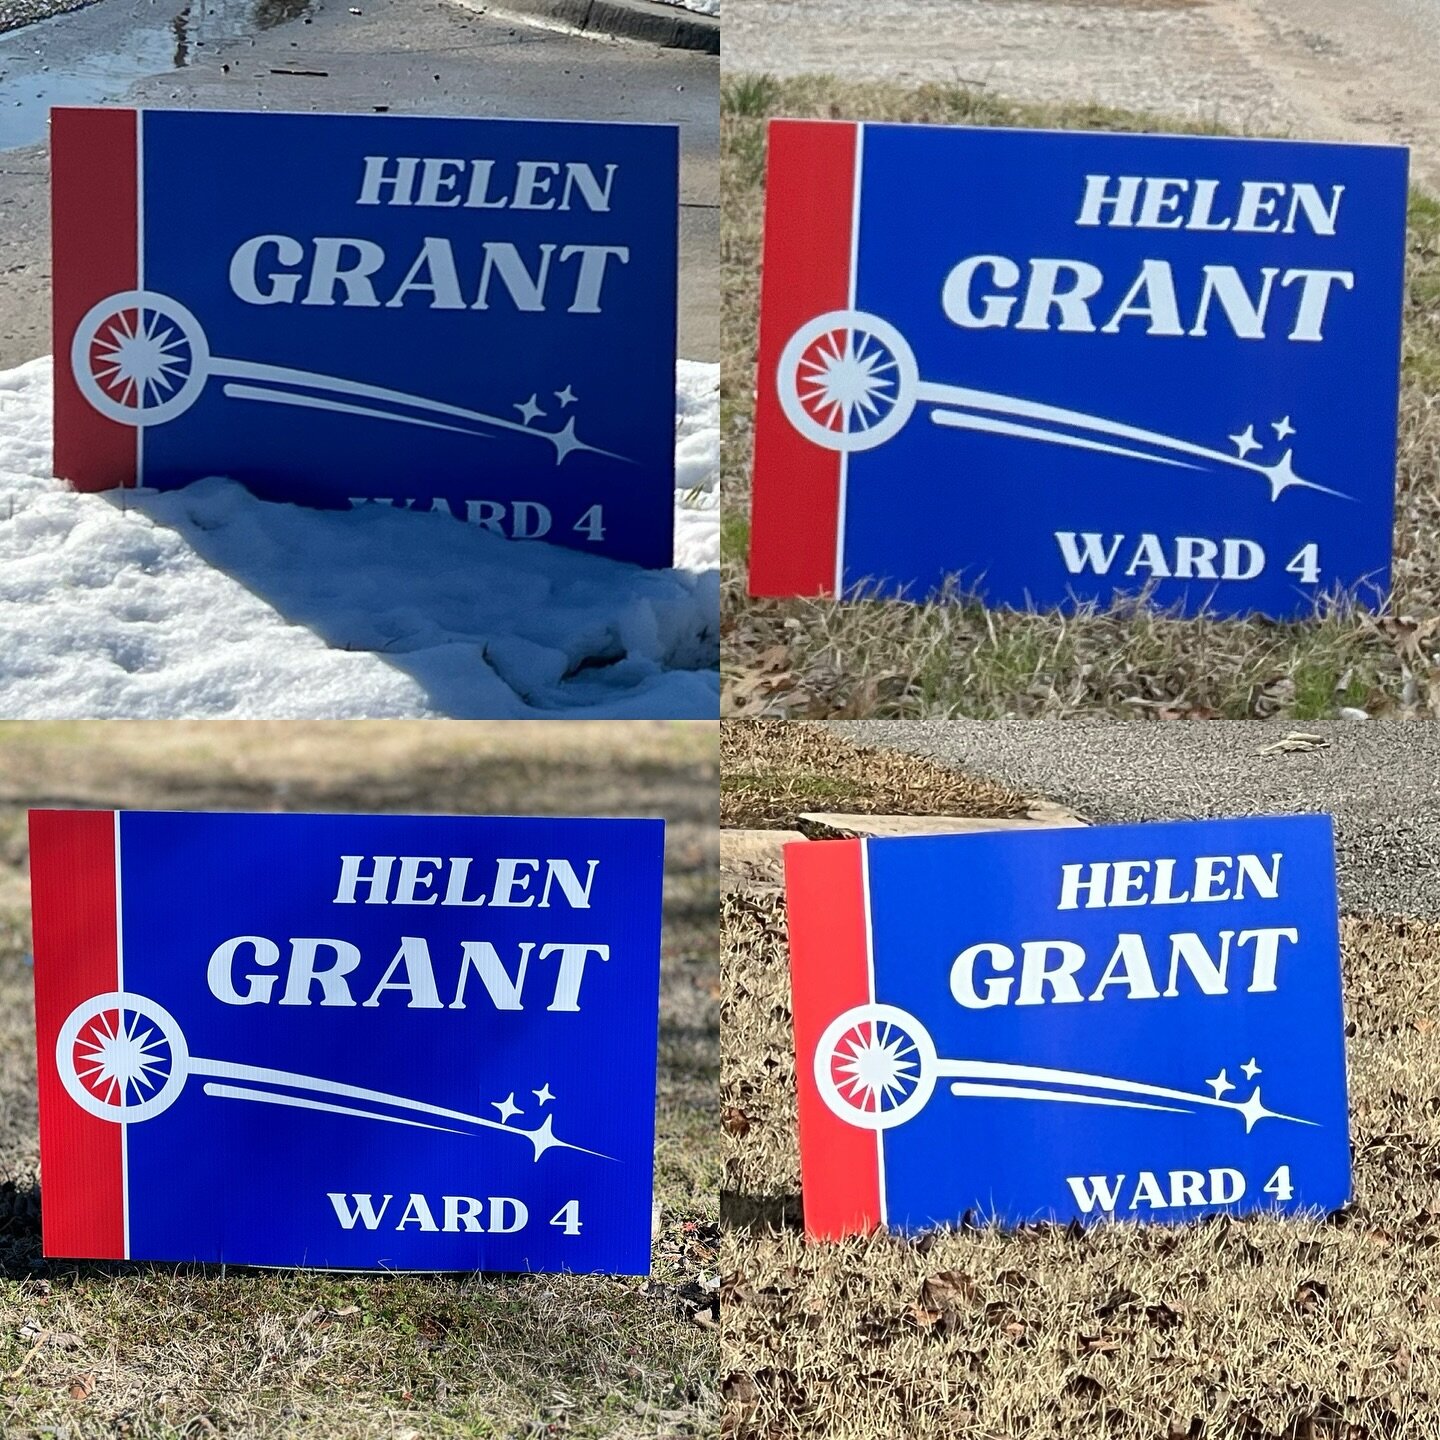 Been busy these past few days on the doors and dropping signs.

I will be by to collect yard signs after the election. If you want to drop yours off at the Helen Grant for Ward 4 Election Night Watch Party (link in bio) tomorrow night at Mainsite, I 